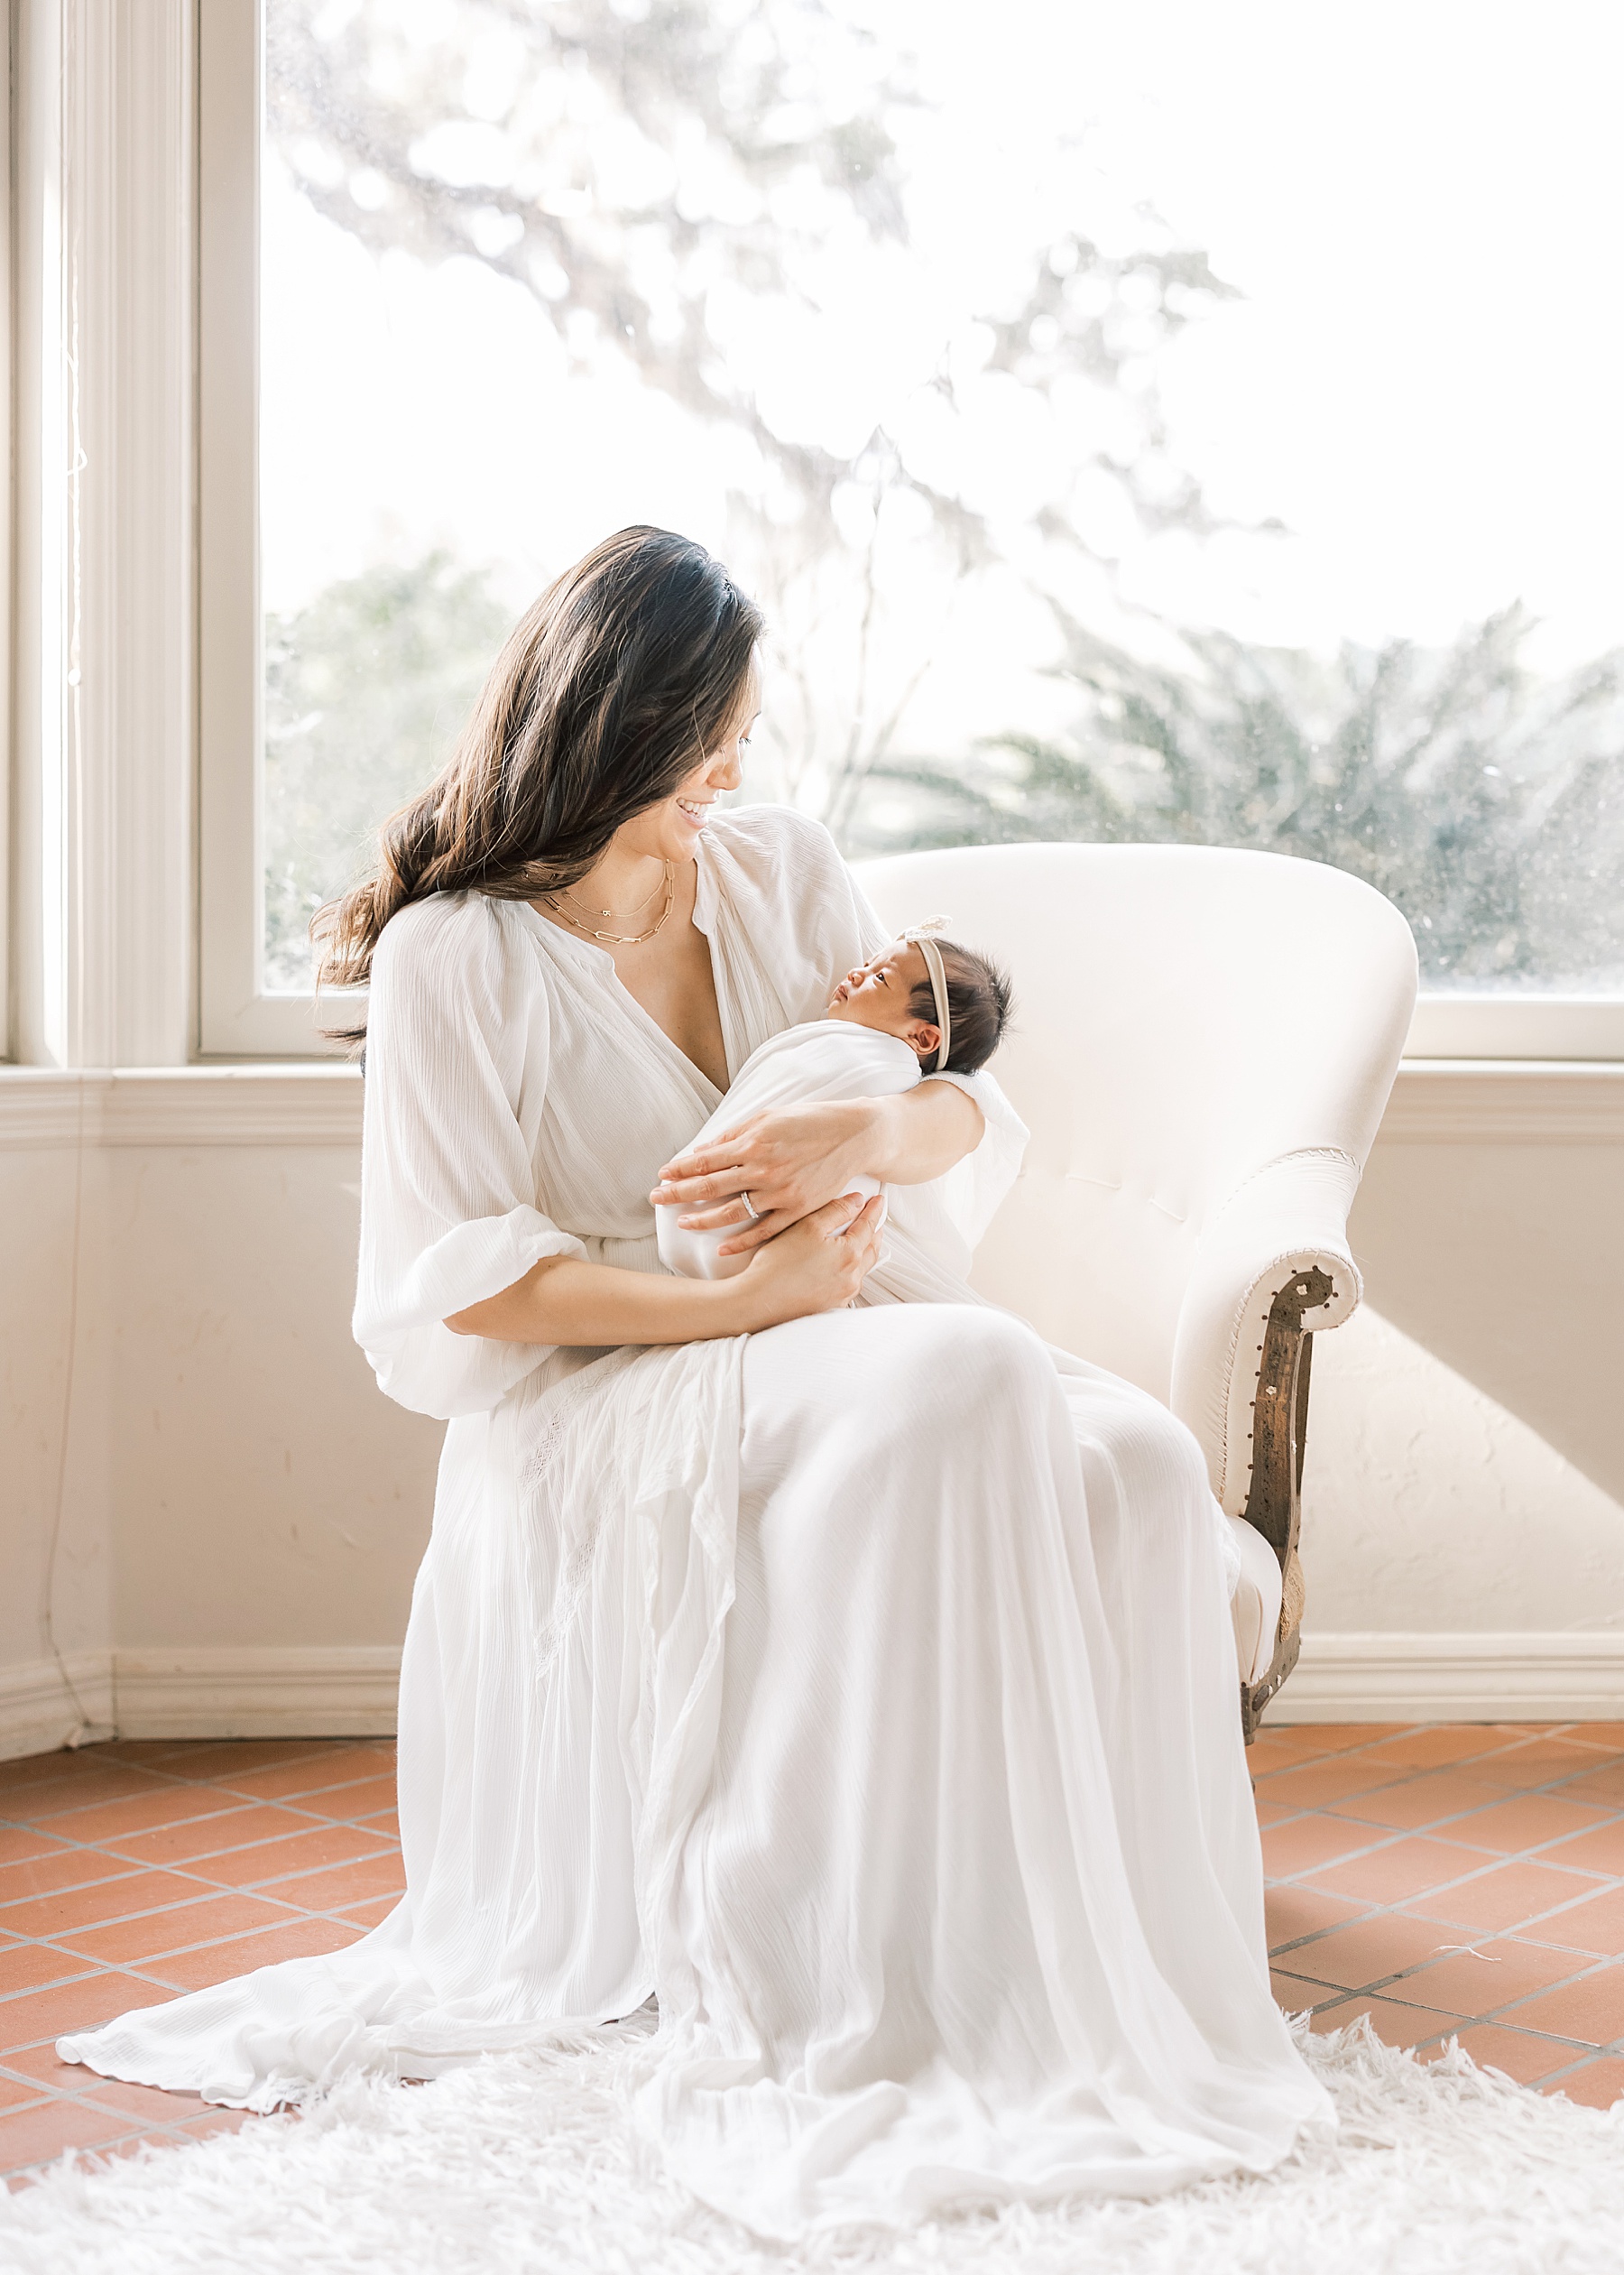 woman with long dark hair in long white dress sitting in vintage chair holding newborn baby girl